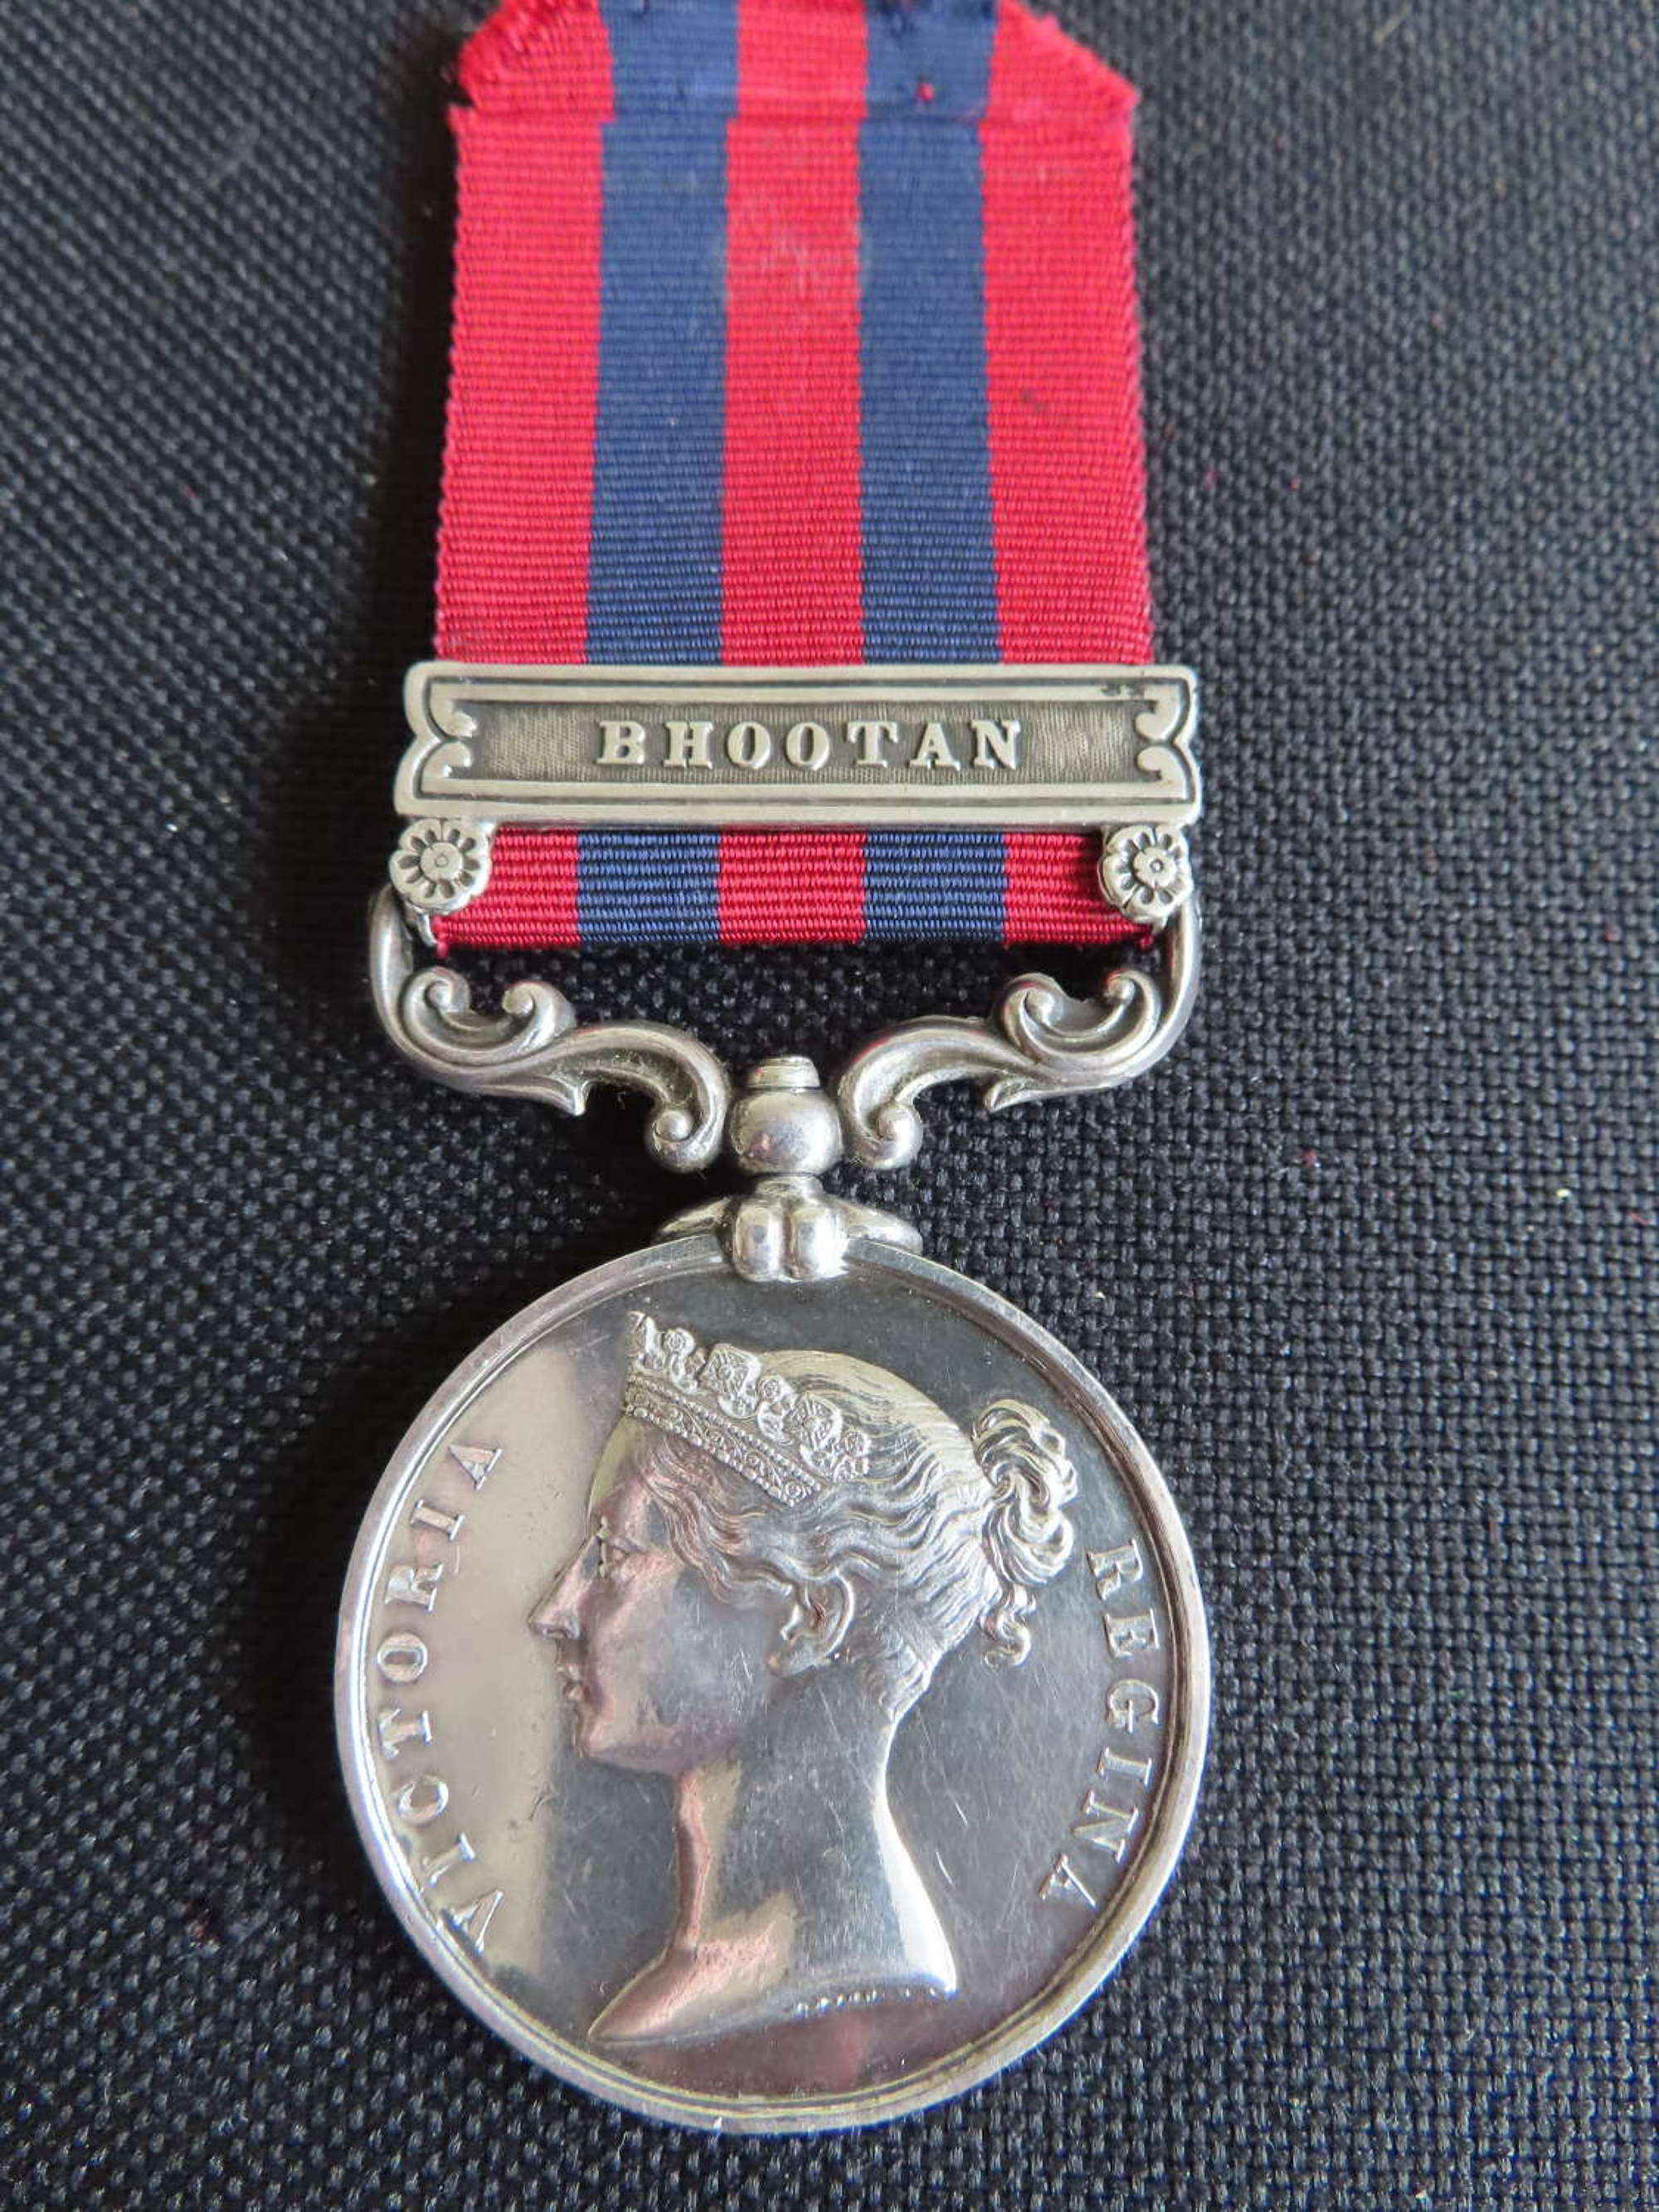 Bhootan India General Service Medal awarded to J McDougall 80th Foot S